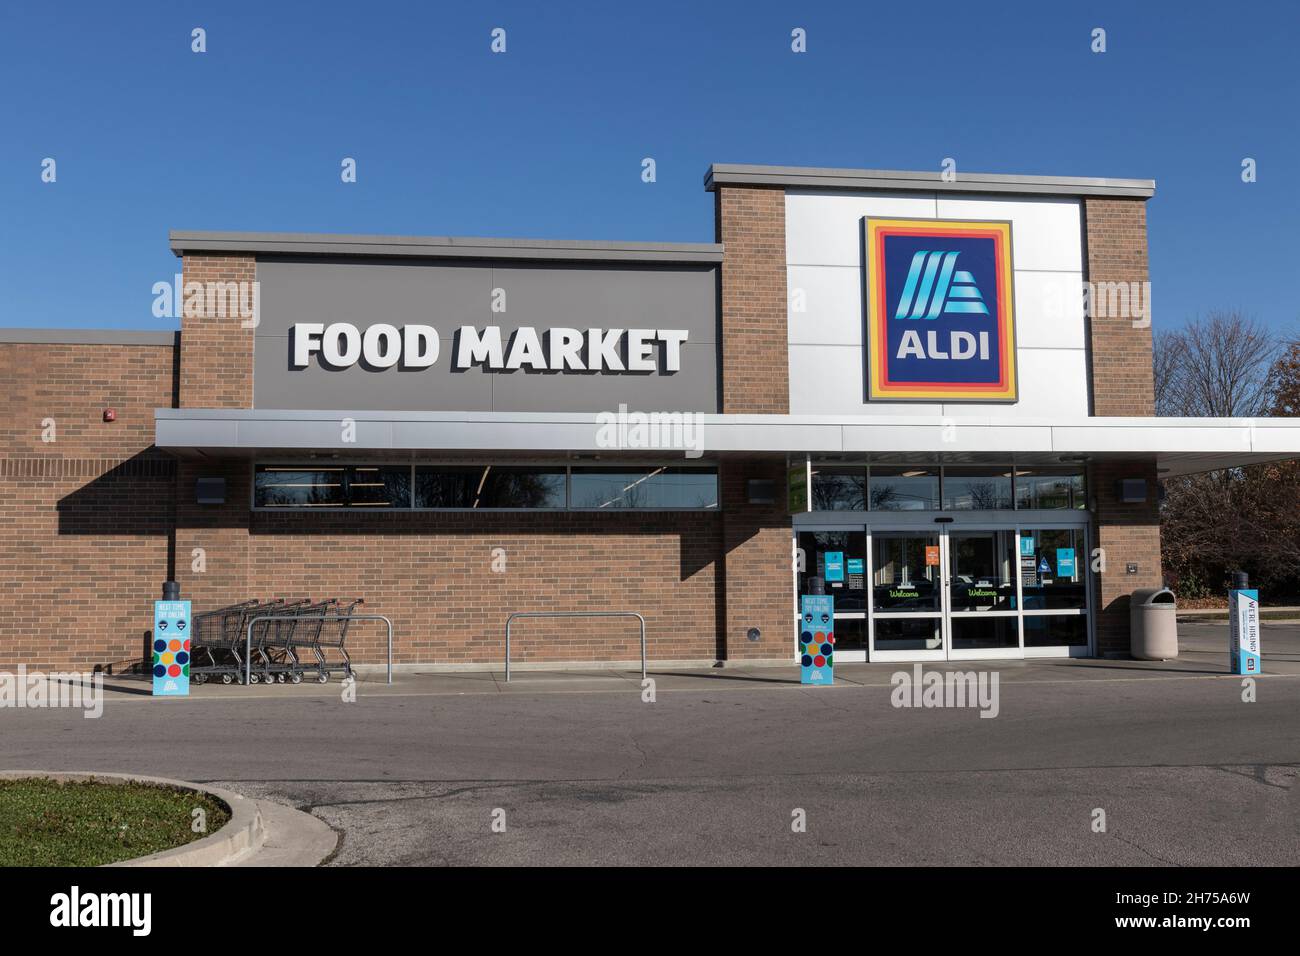 Anderson - Circa November 2021: Aldi Discount Supermarket. Aldi sells a range of grocery items, including produce, meat and dairy at discount prices. Stock Photo